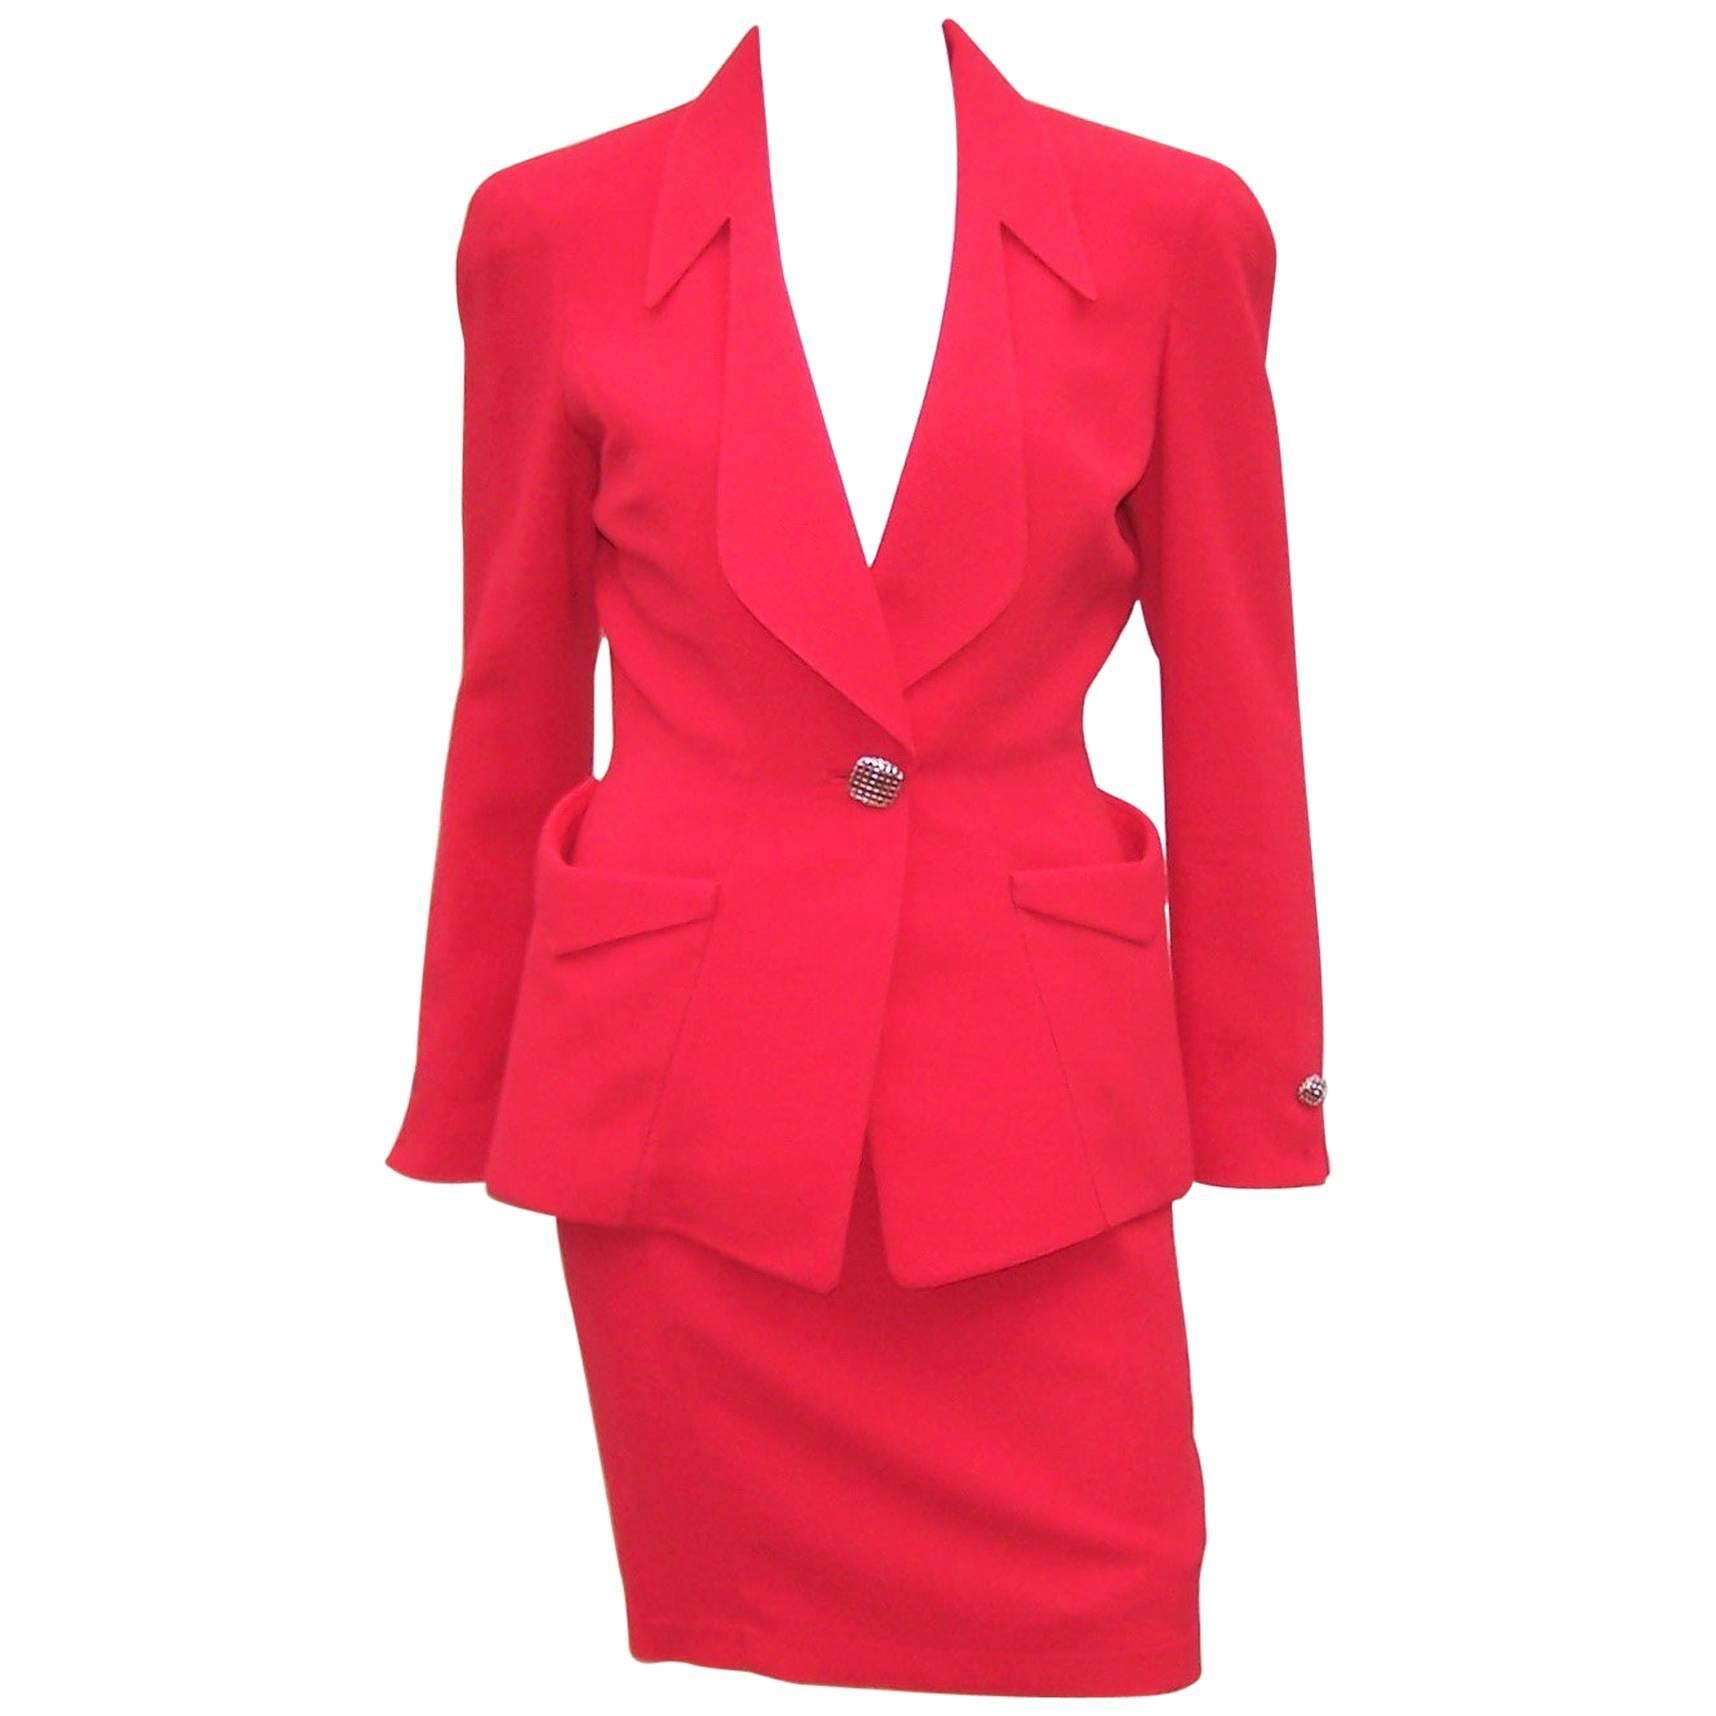 1980's Thierry Mugler Lipstick Red Suit With Silver Buttons